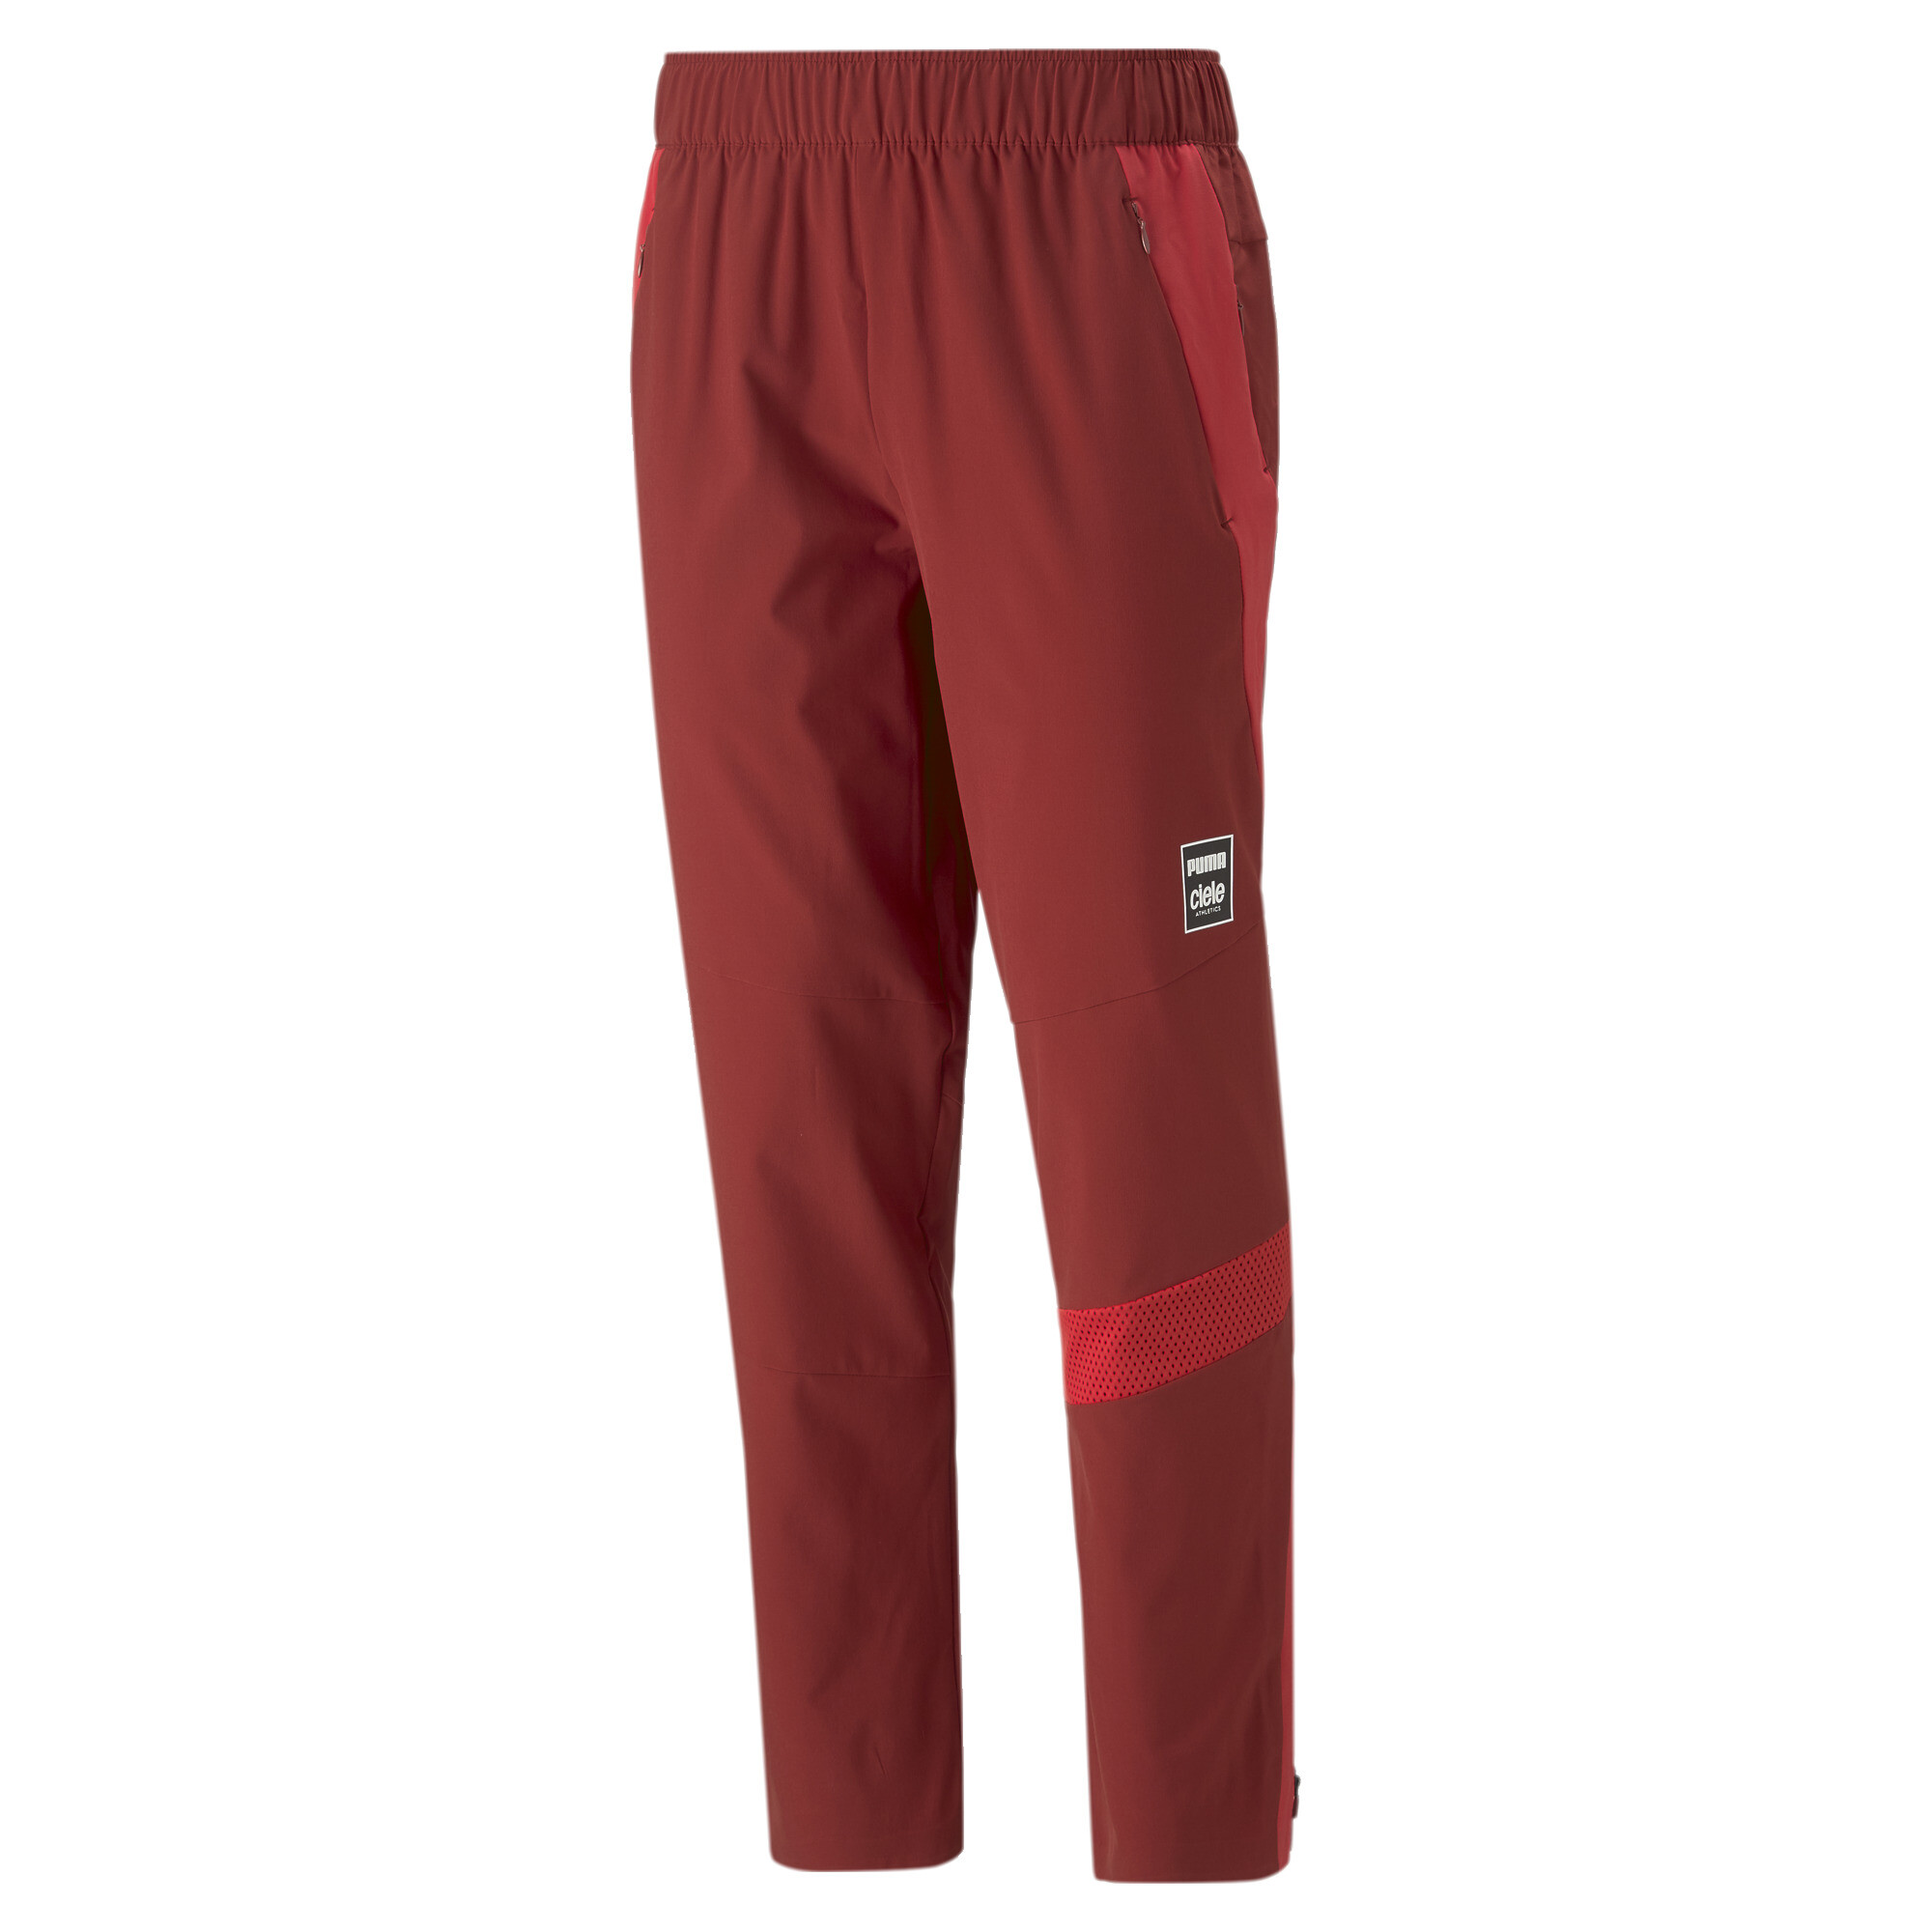 Men's PUMA X CIELE Running Tracksuit Pants In Red, Size XL